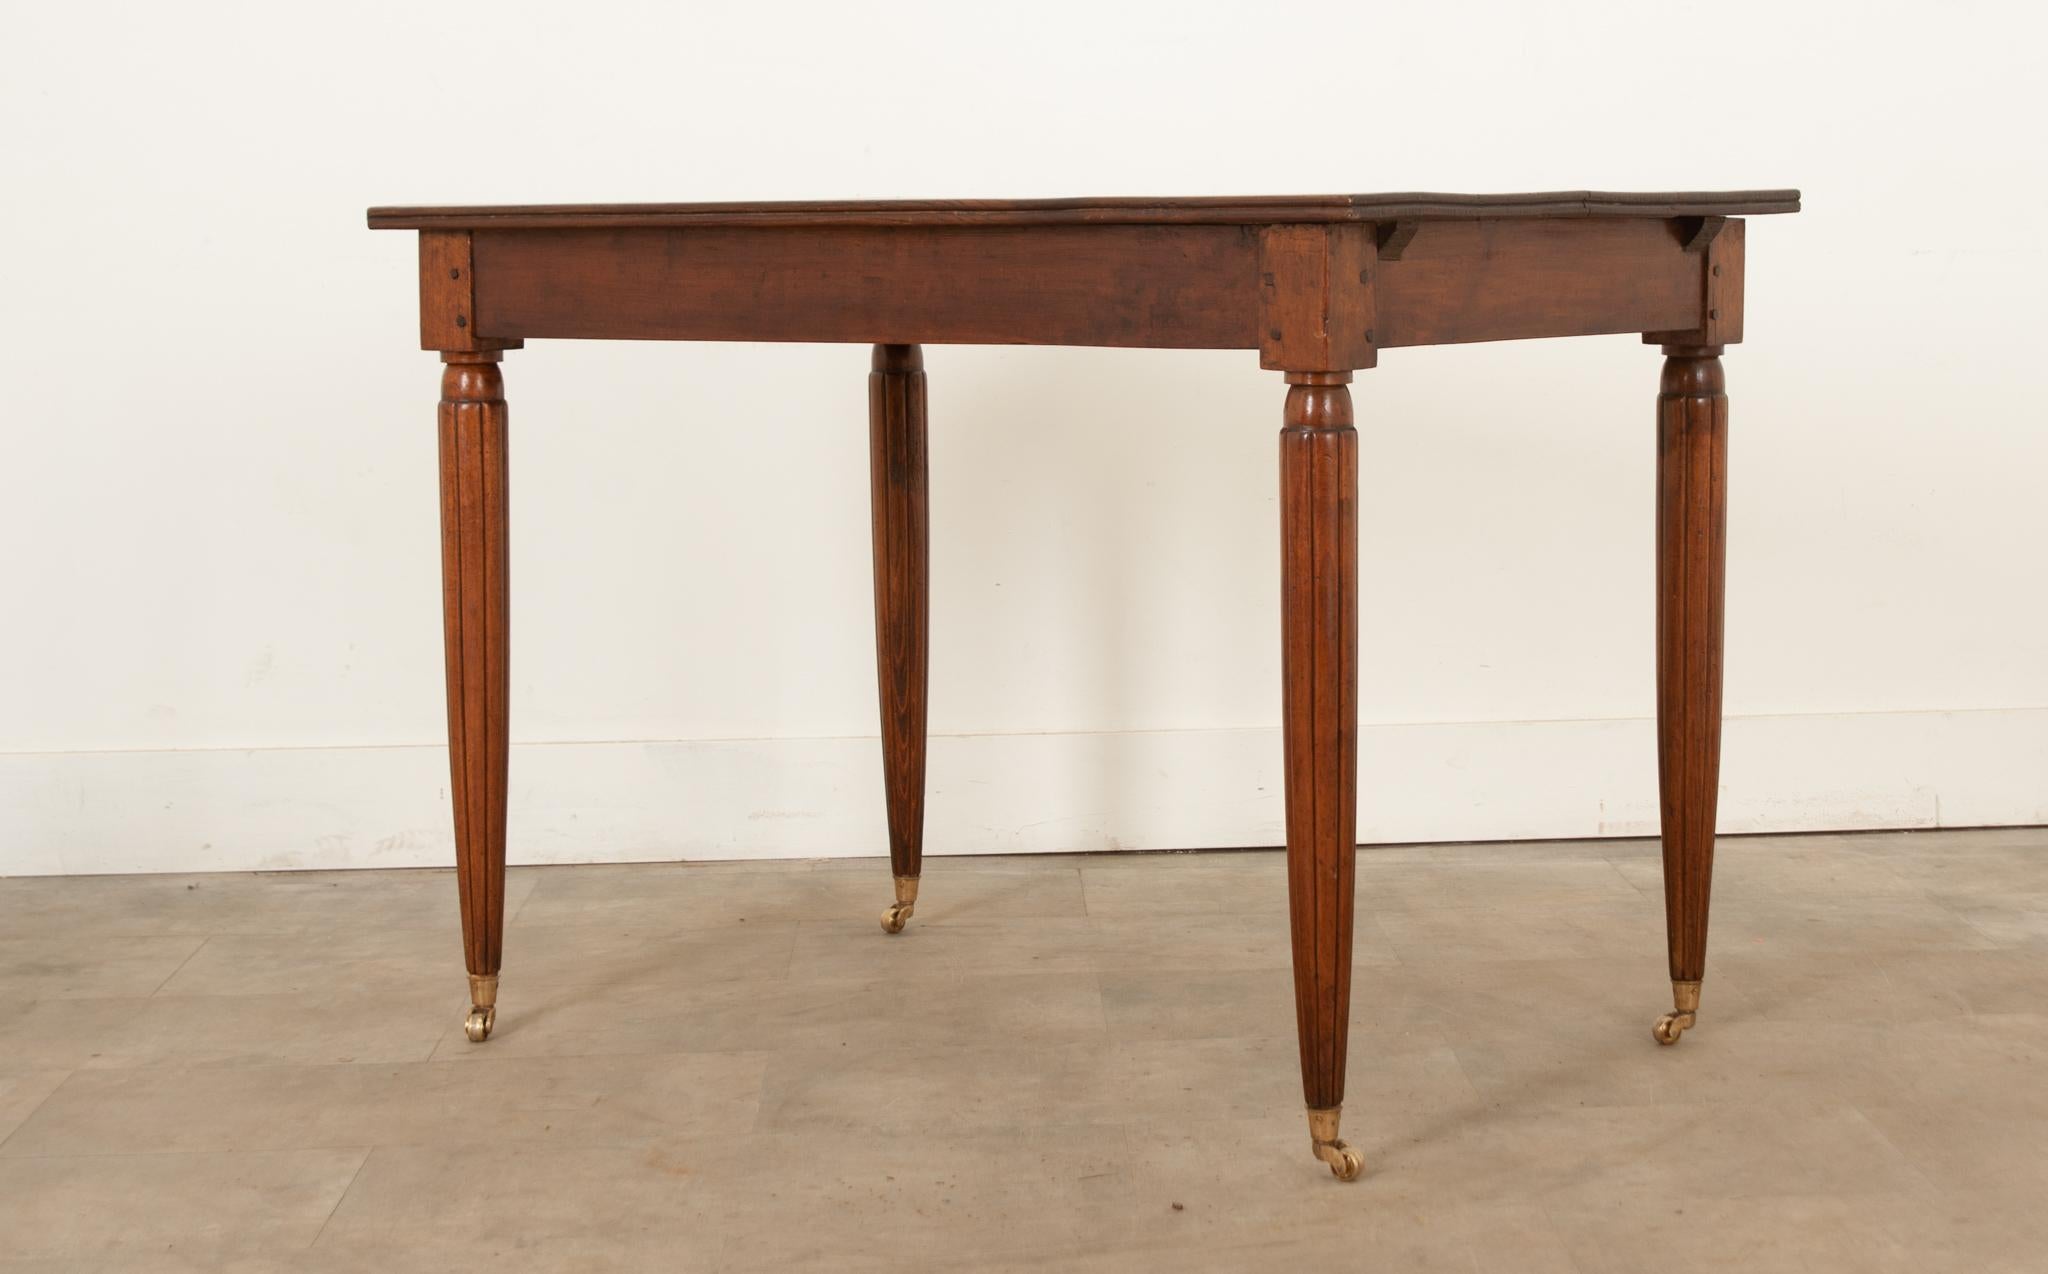 A fantastic French solid walnut  bistro table, made about the turn of the Century. This unassuming table has subtle stylings that make it anything but simple. Beautiful expression can be found in the grain of the walnut, which has a uniform and